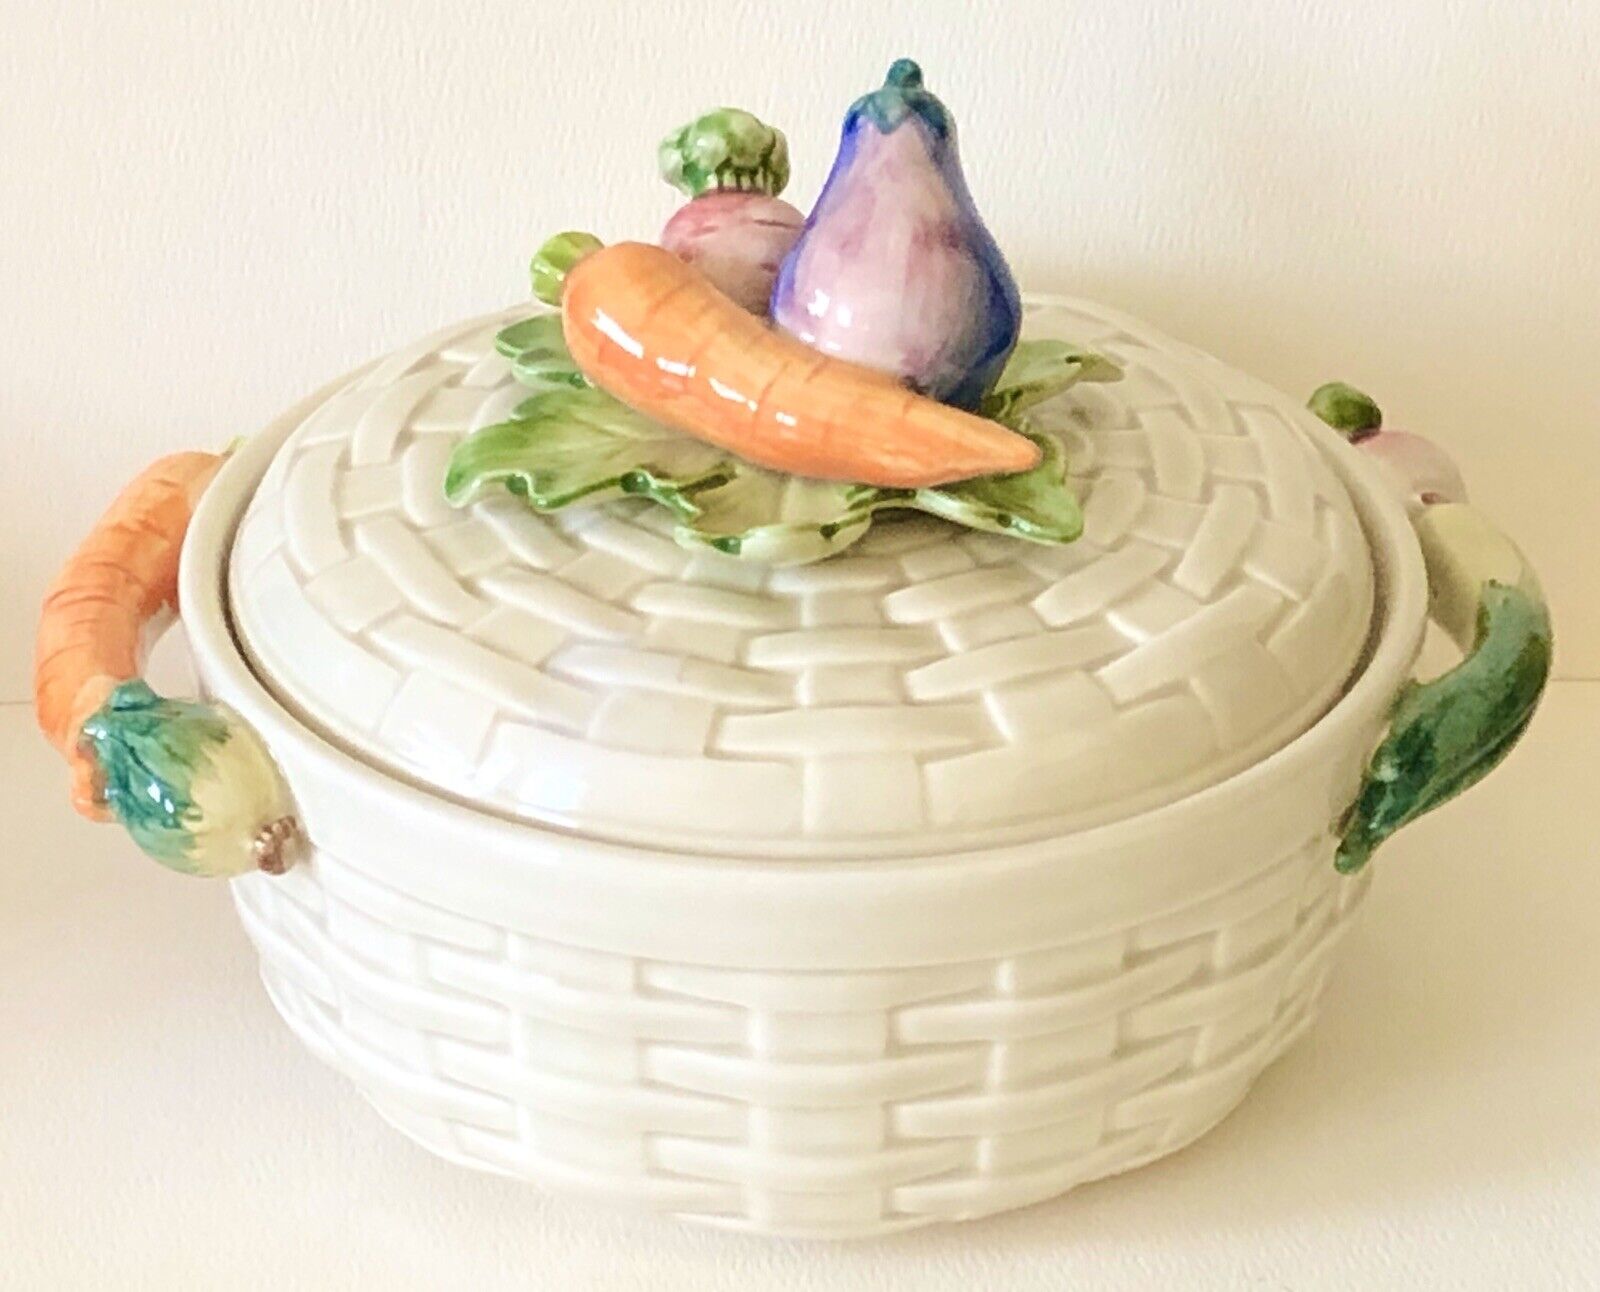 Vintage Fitz and Floyd Ceramic 1 QT Covered Casserole Dish Vegetable Garden Bowl